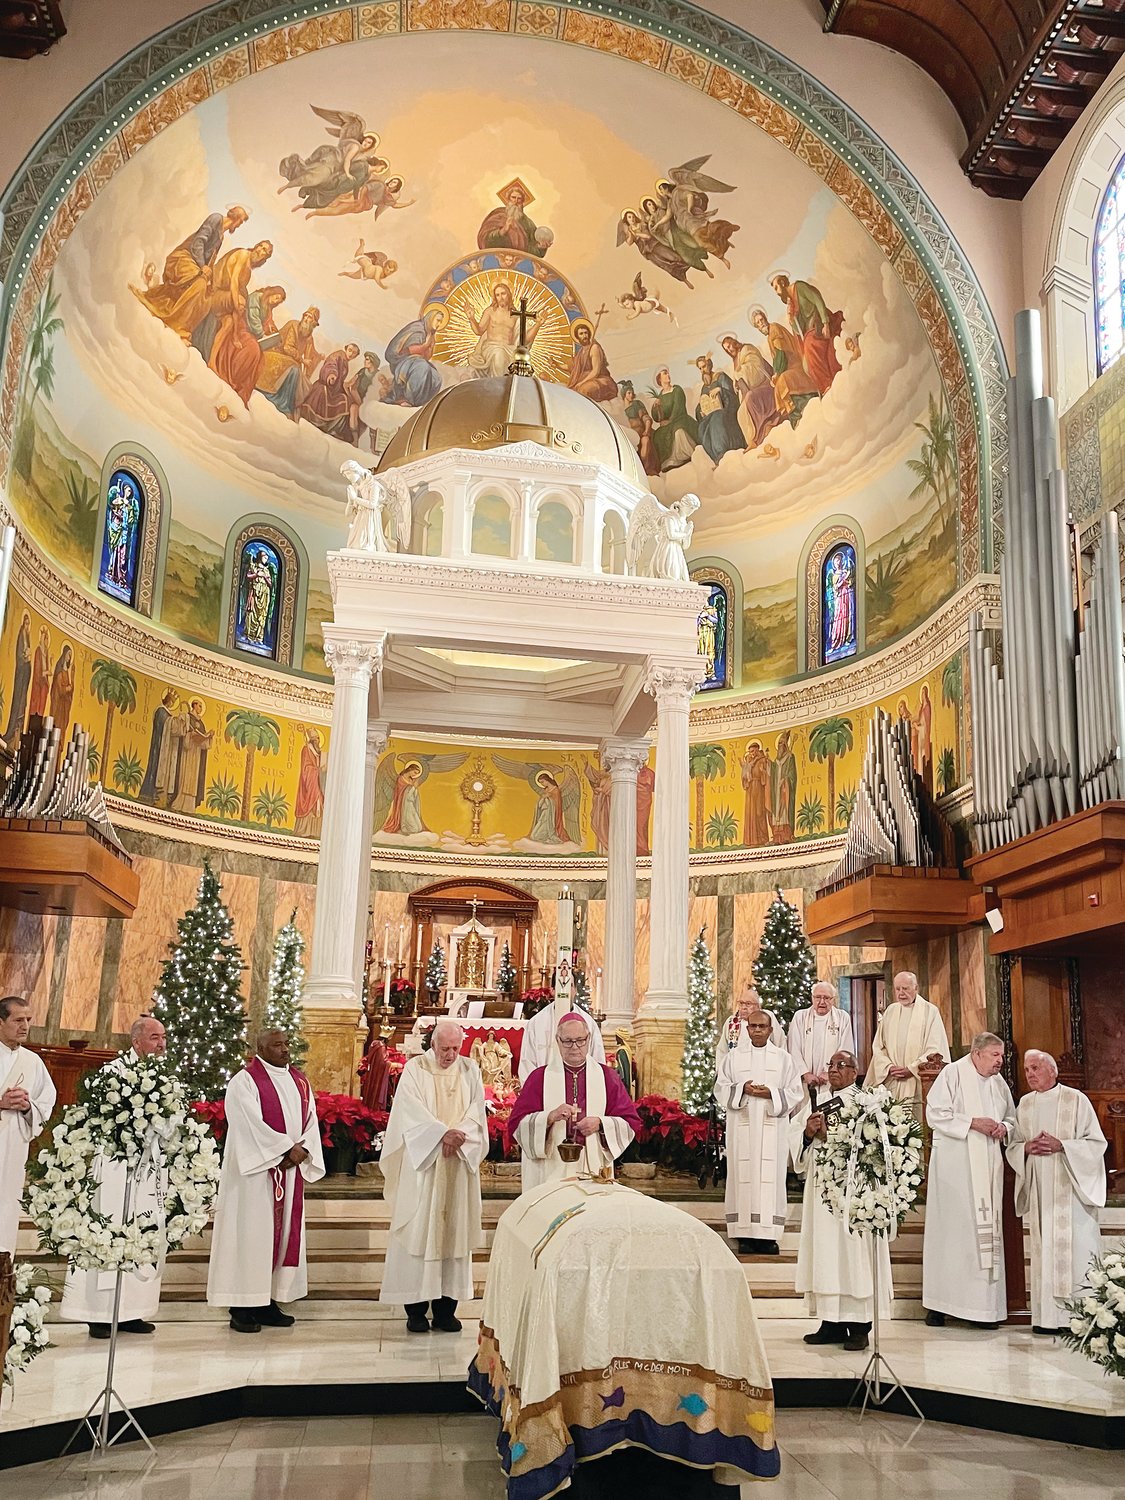 Bishop Thomas J. Tobin was in attendance and offered the Final Commendation at Father Raymond Tetrault's Mass of Christian Burial, which was celebrated Jan. 7 by Father Robert Beirne, who also served as homilist.